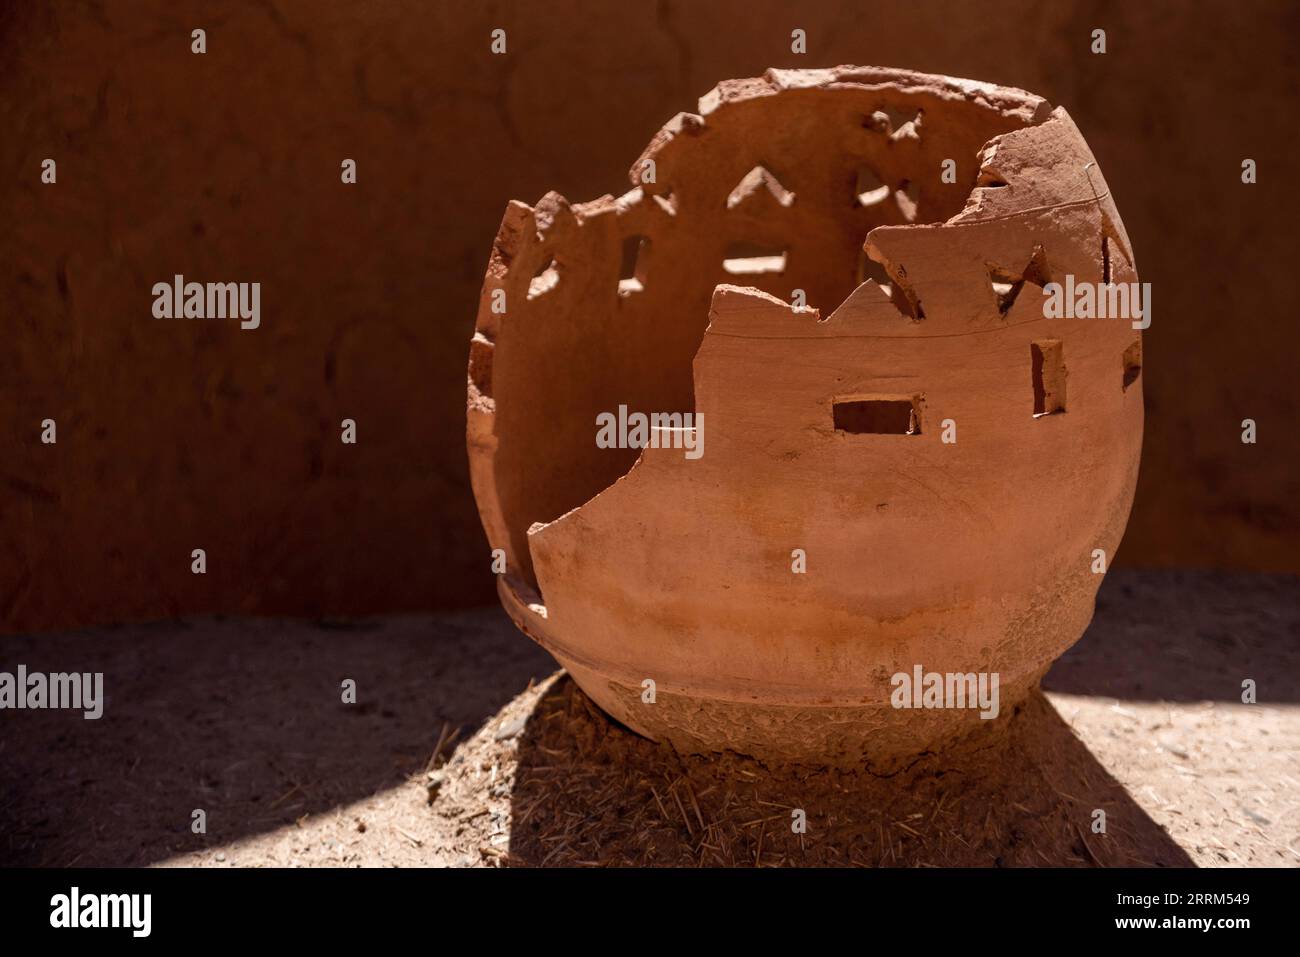 Old vase purposely broken in a decorative way, Morocco Stock Photo